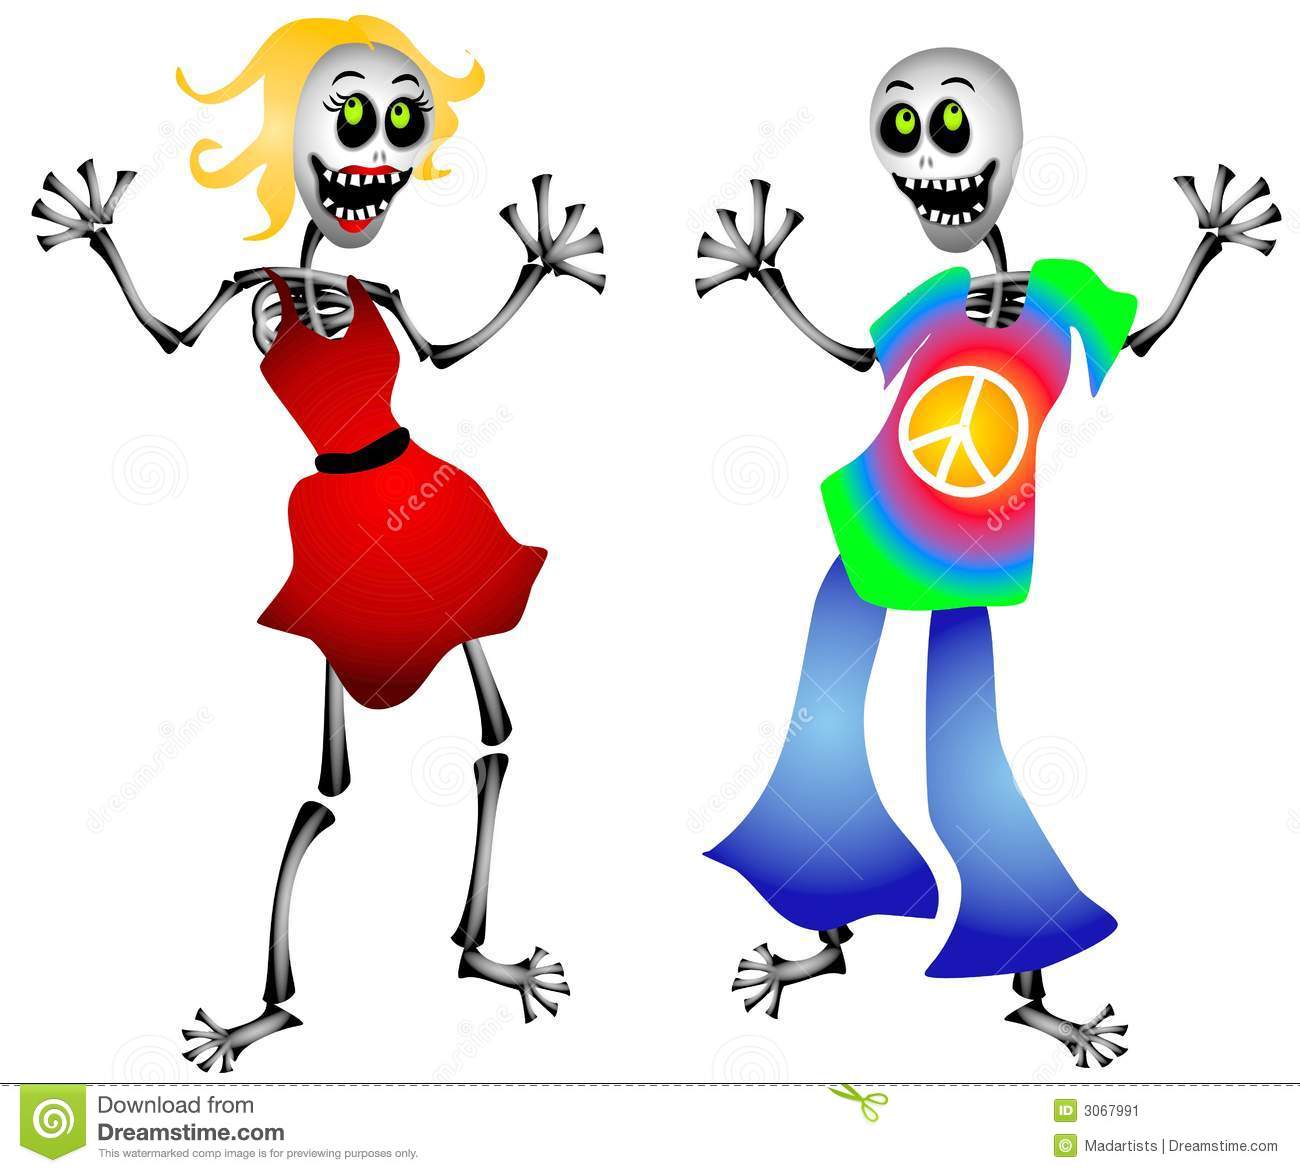 Halloween Party Skeletons   Clipart Panda   Free Clipart Images